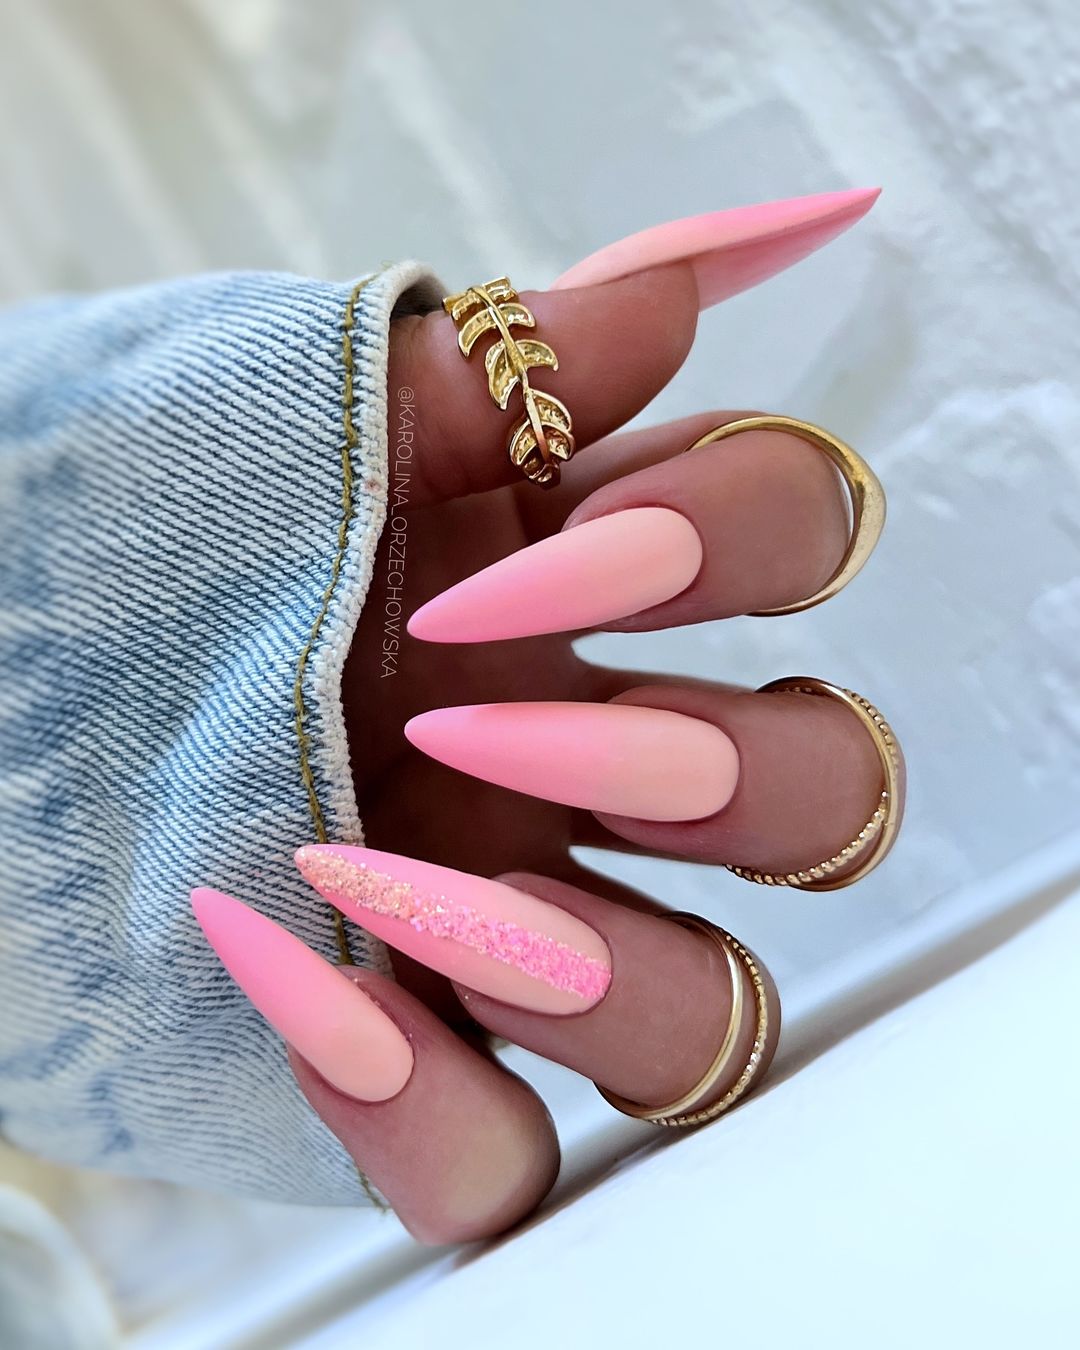 Fall Ombre Nails: 27 Ideas to Inspire Your Next Manicure